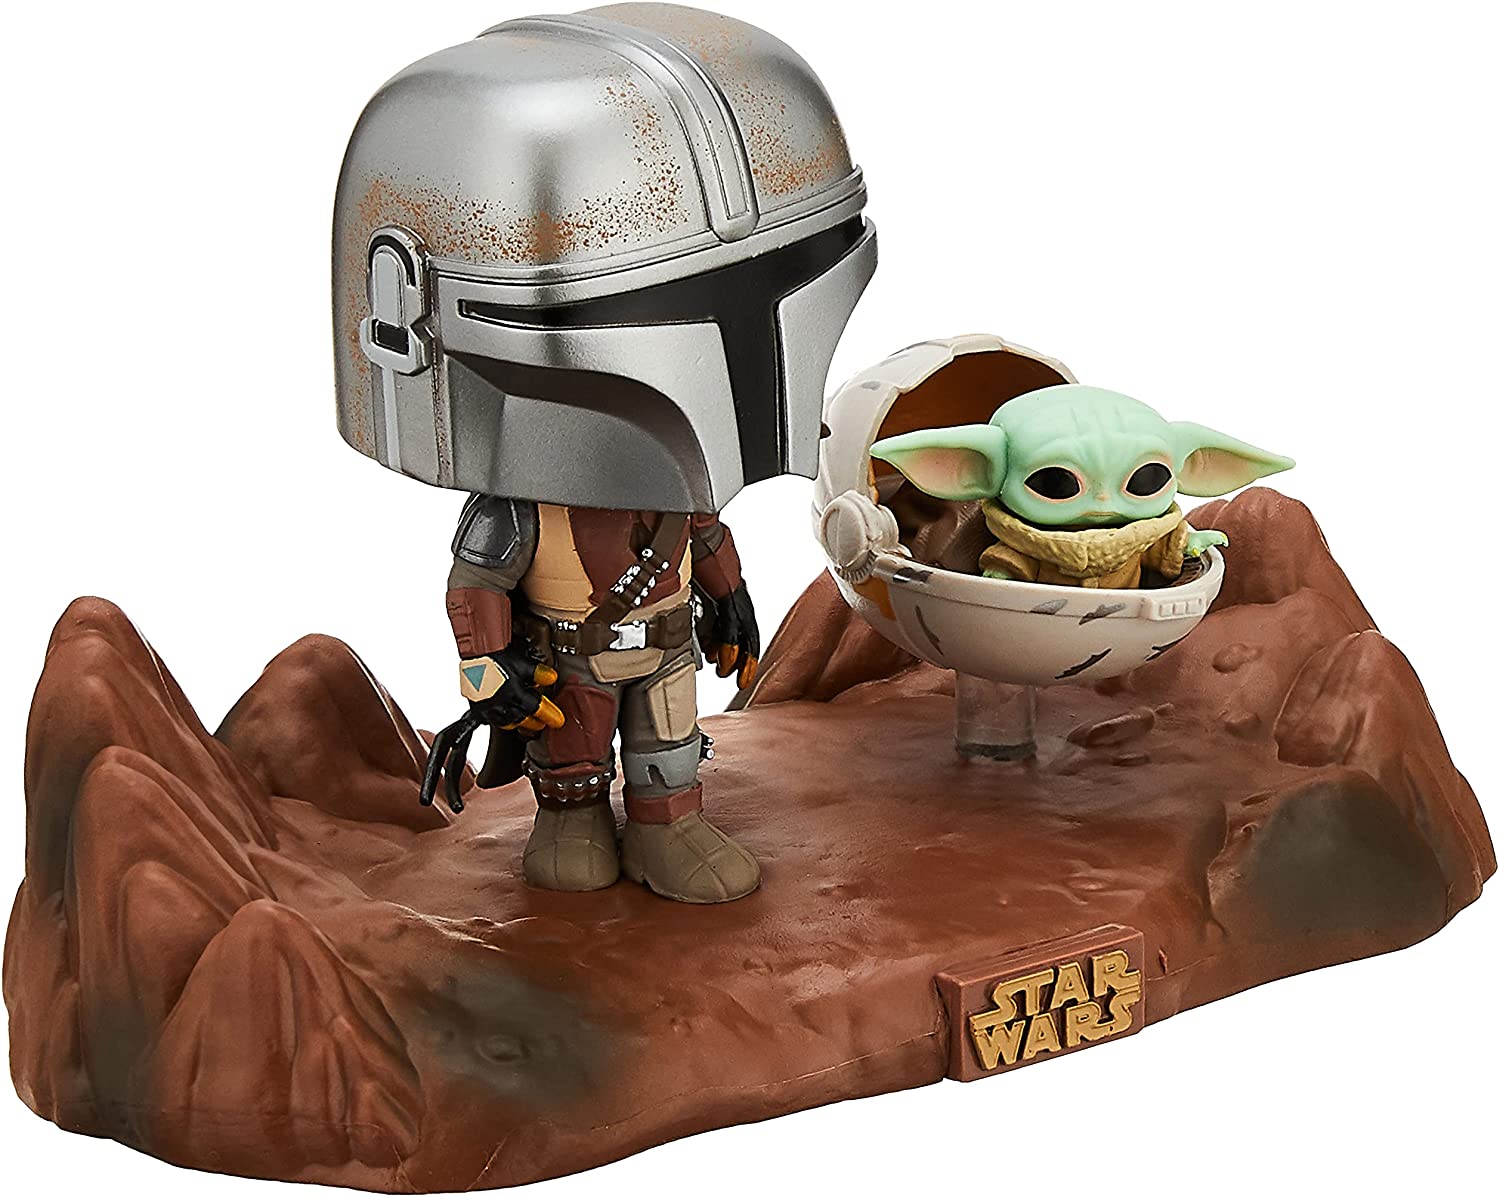 Funko Pop! Moment Star Wars: The Mandalorian and The Child Vinyl Bobblehead $11.99 + Free S&H w/ Prime or orders $25+ ~Amazon